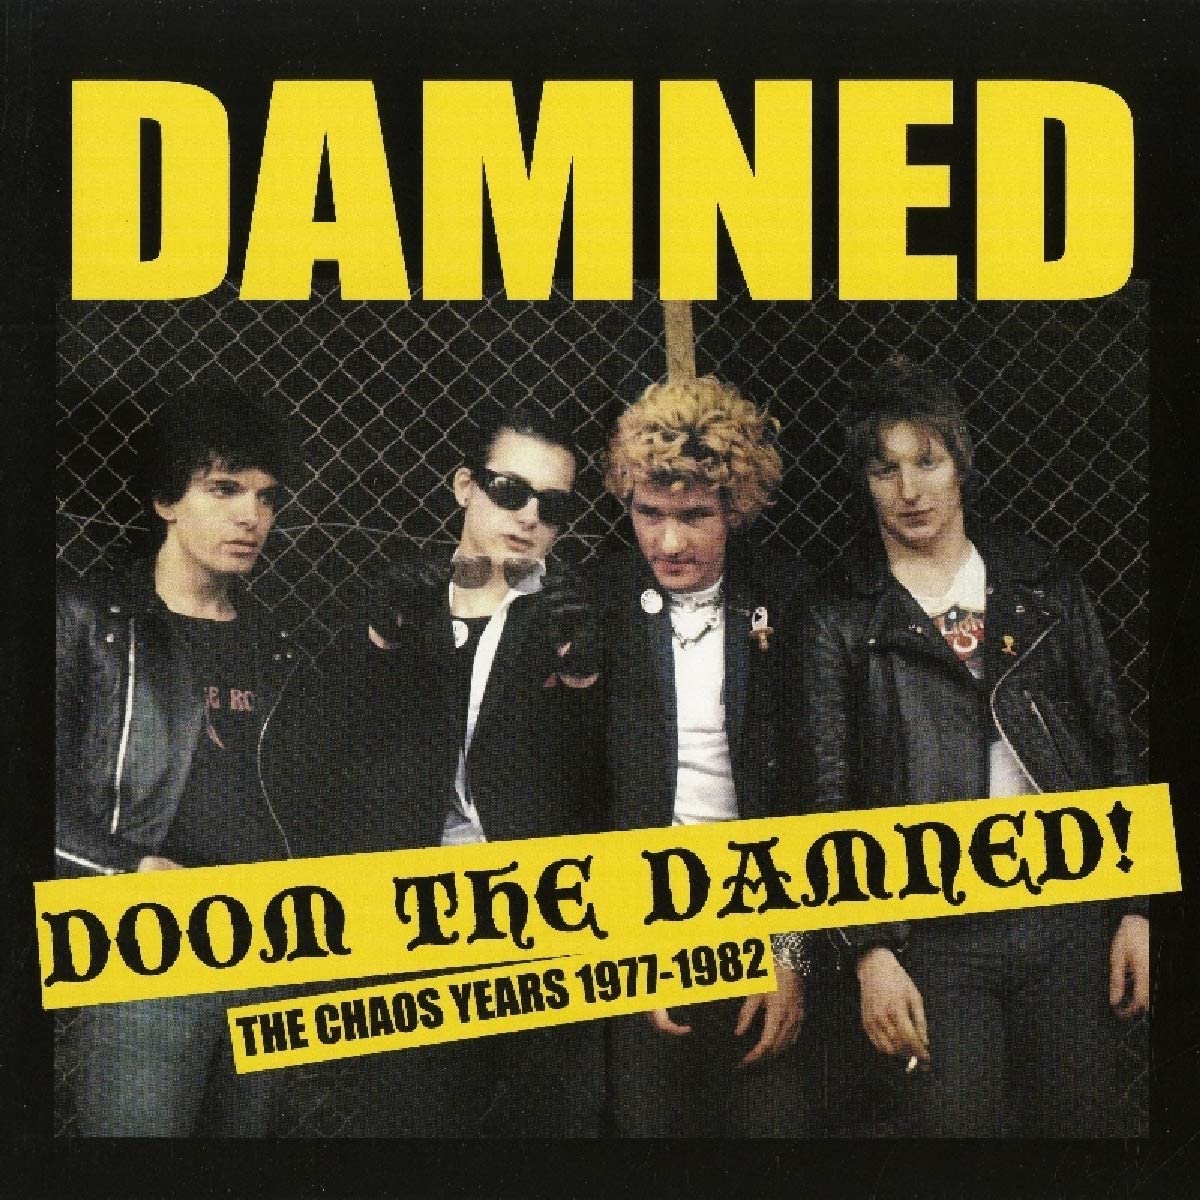 Damned-The---The-Chaos-Years-1977-1982-Doom-The-Damned-2